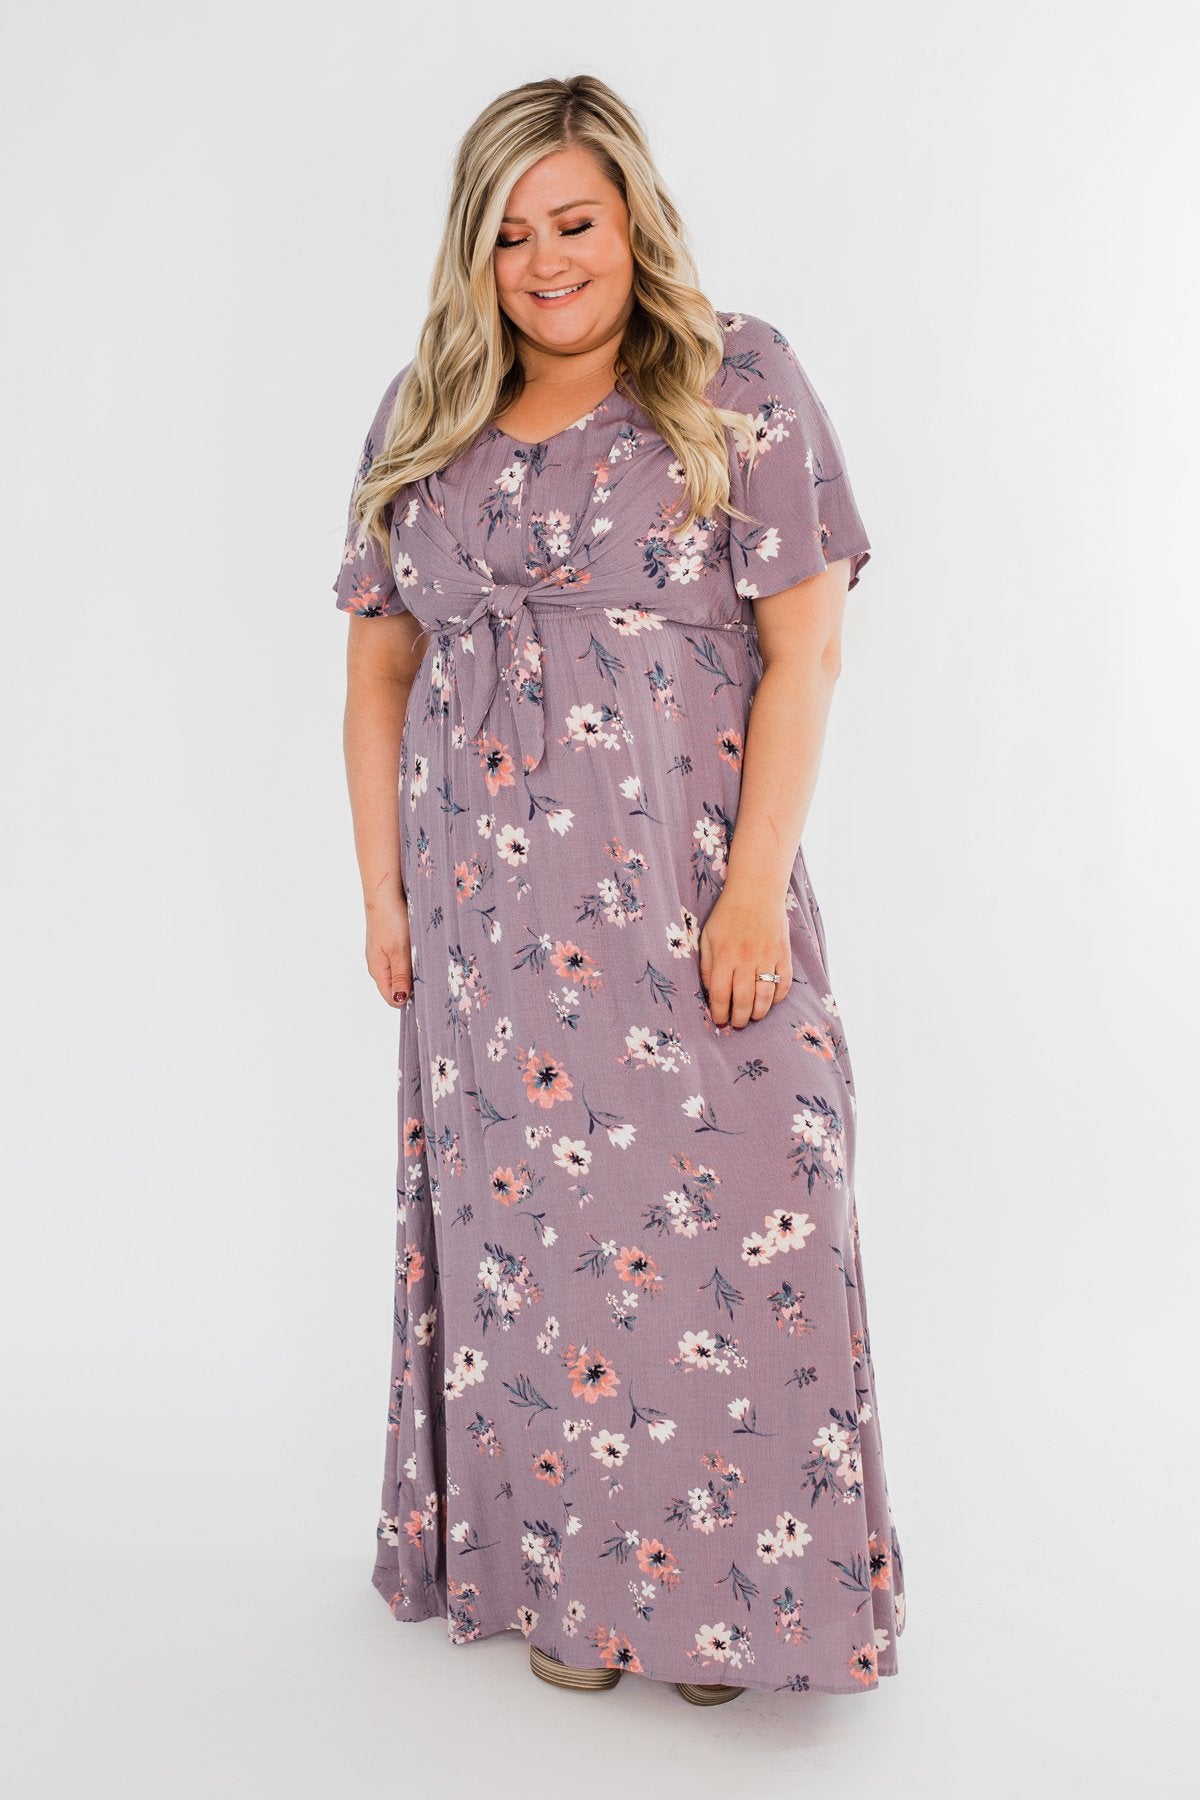 Holding Back This Feeling Cinch Maxi Dress- Lavender